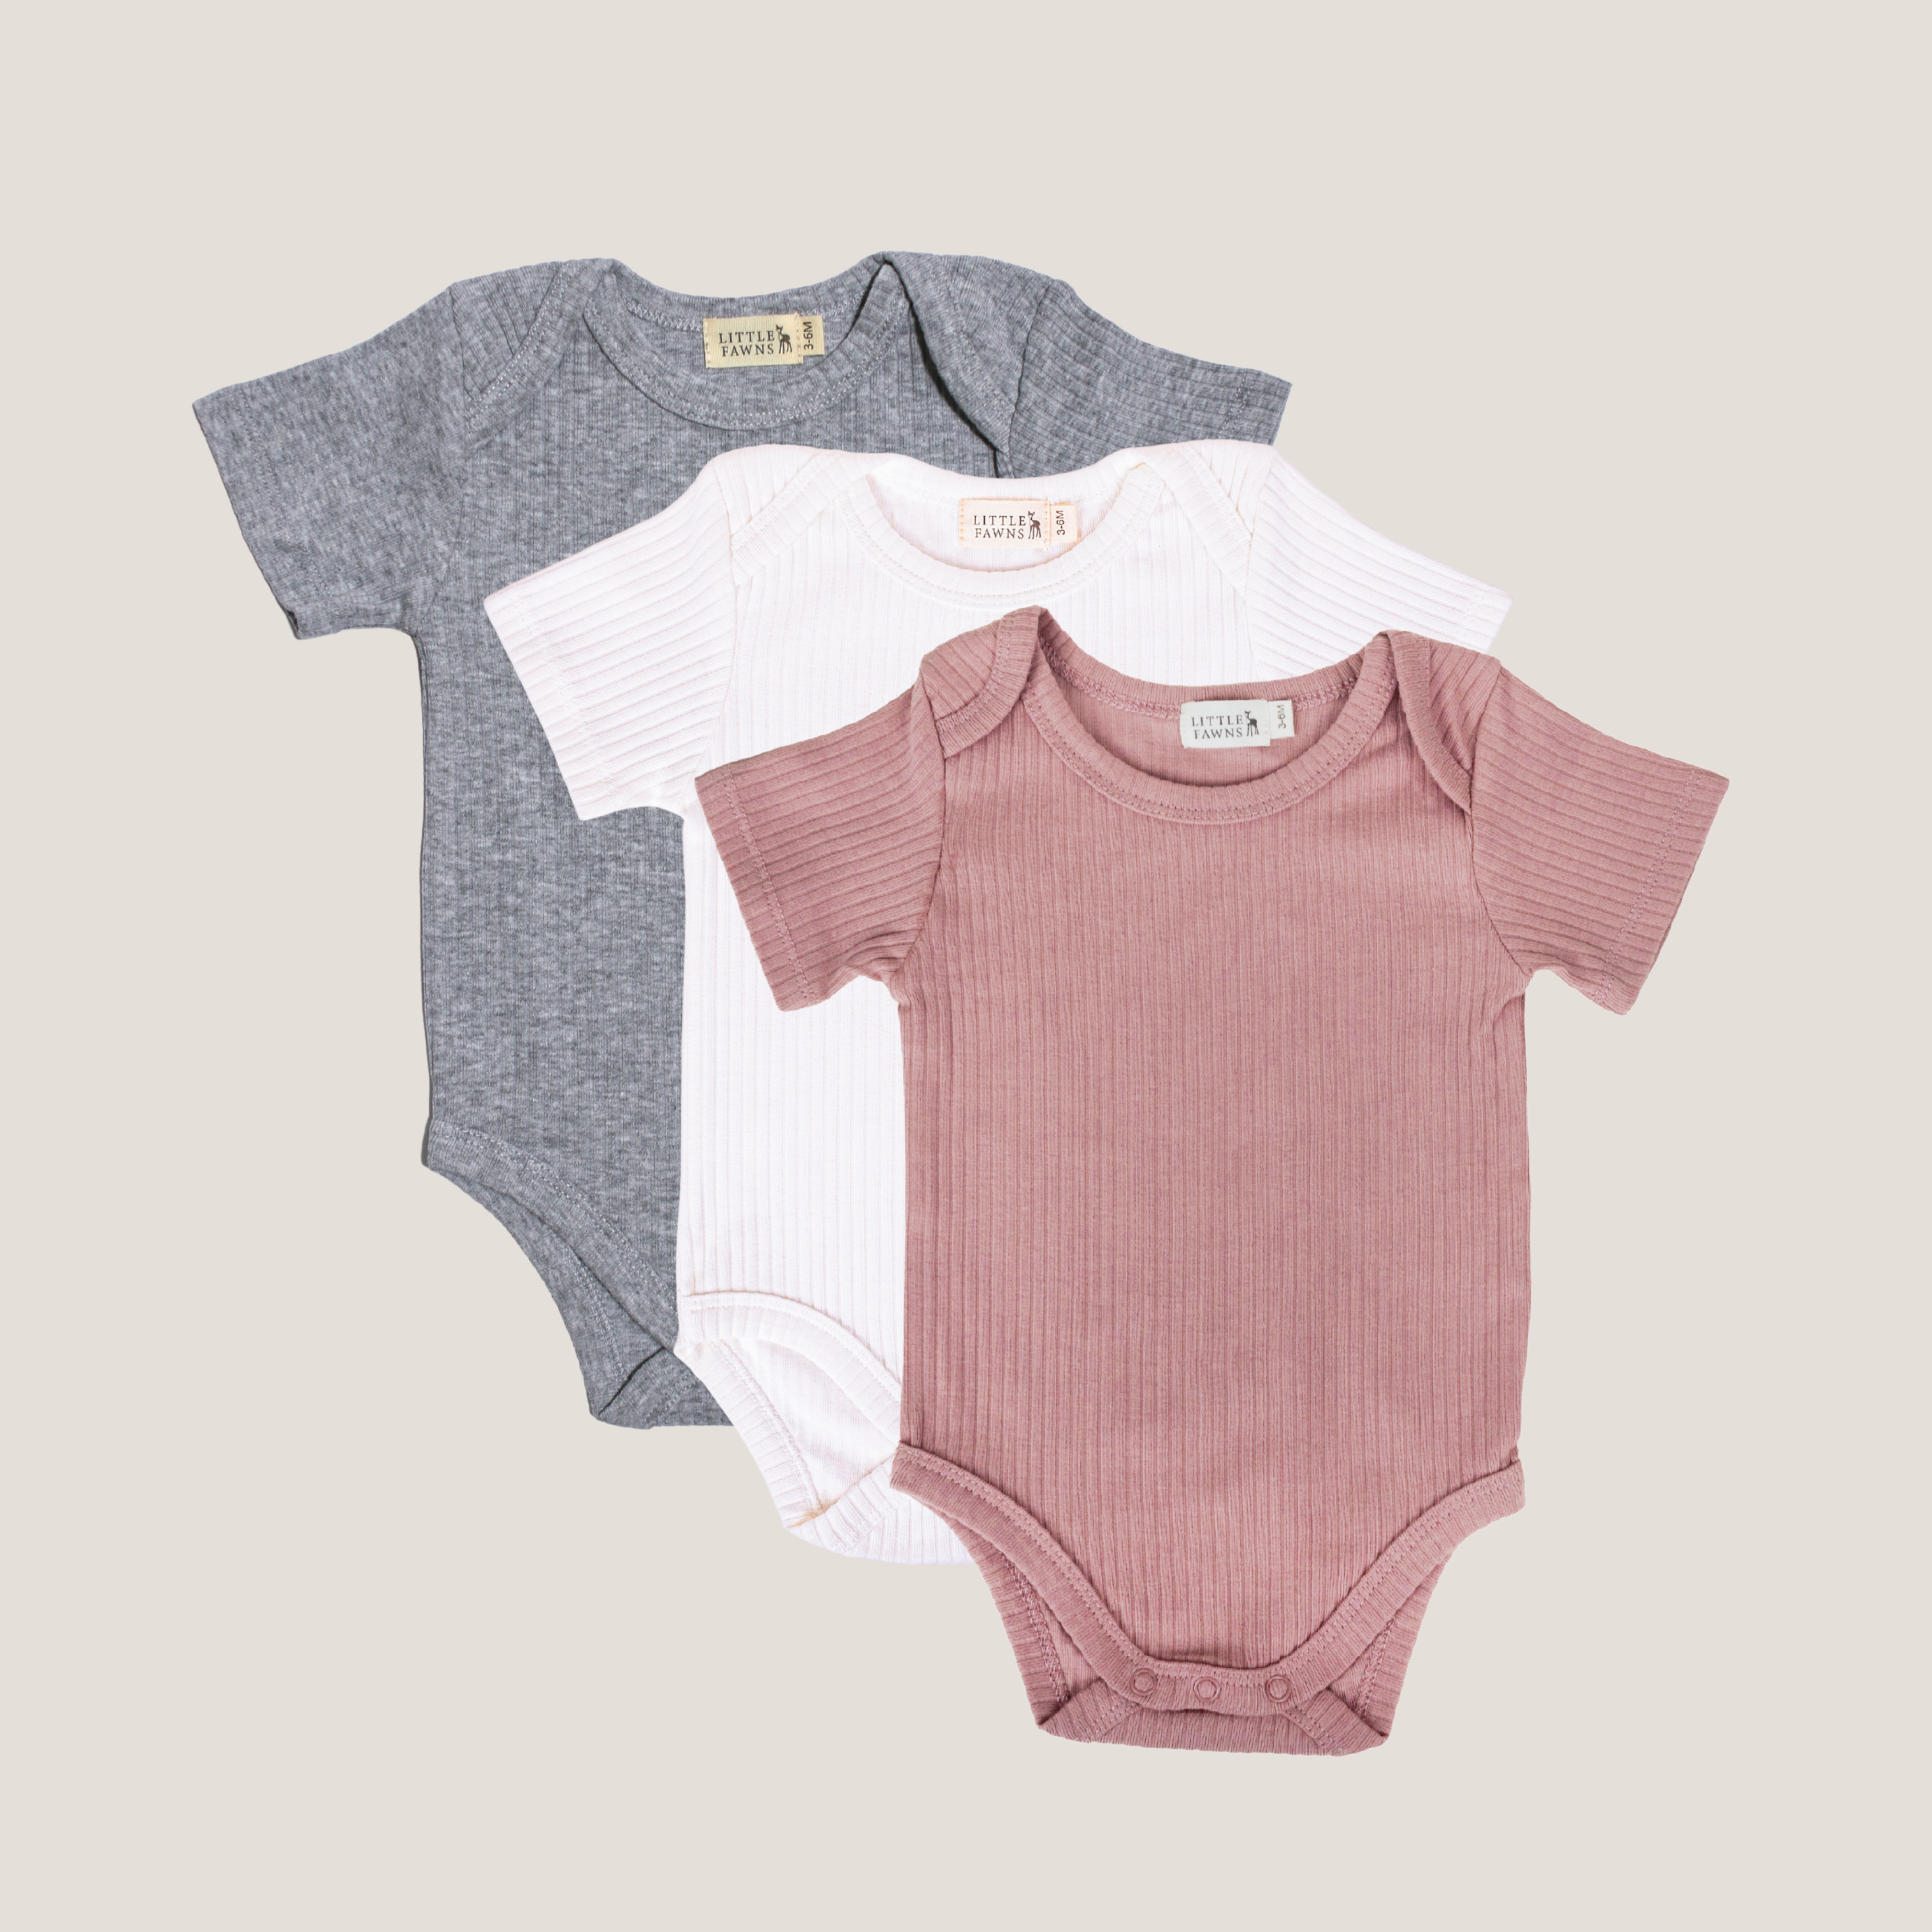 Ribbed Short Sleeve Romper Bundle (Dusty Pink, Winter White and Classic Grey)